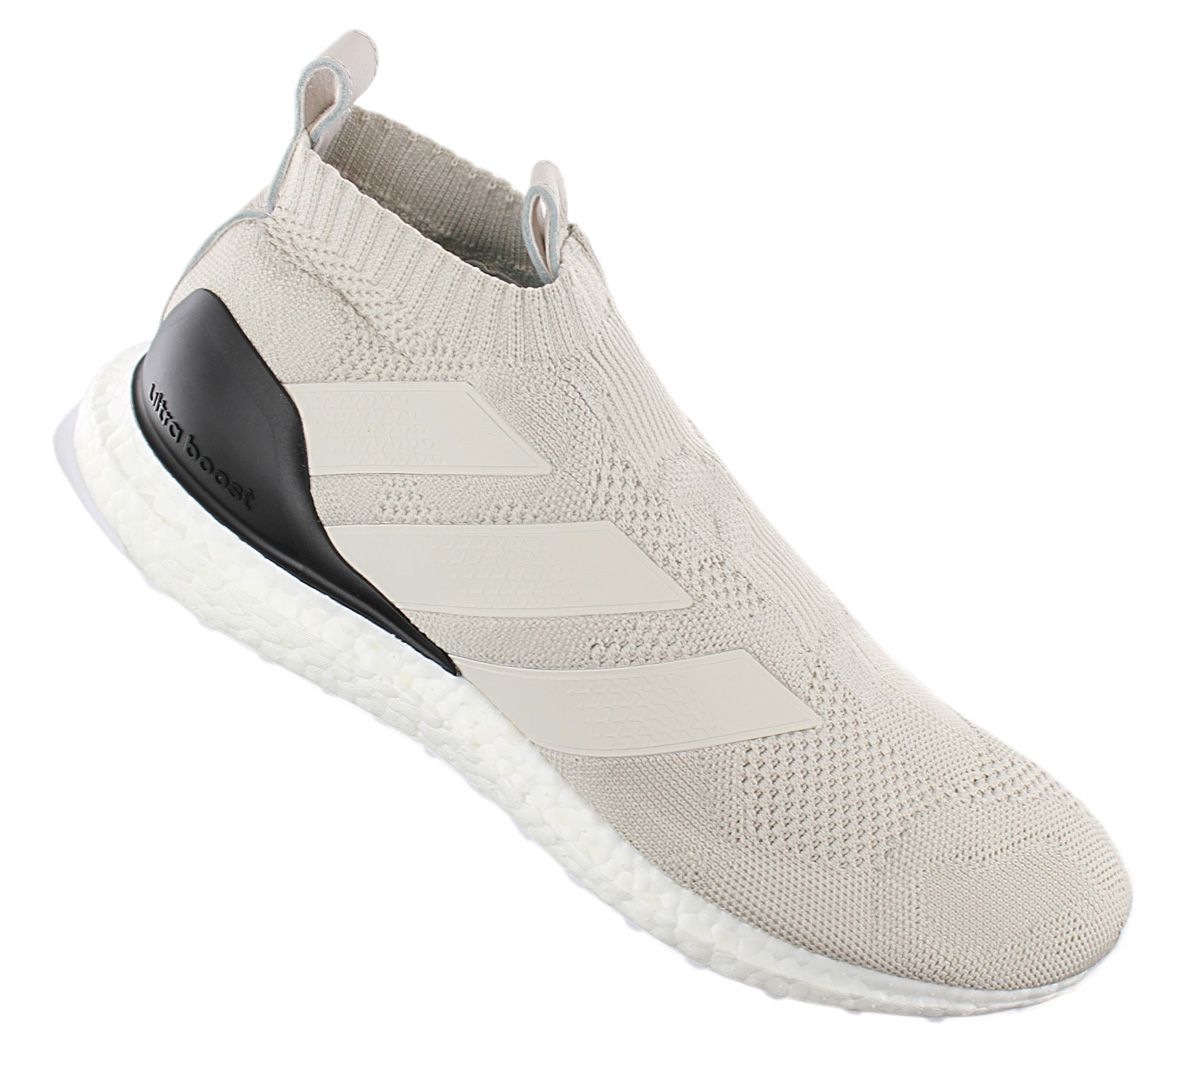 adidas ace trainers